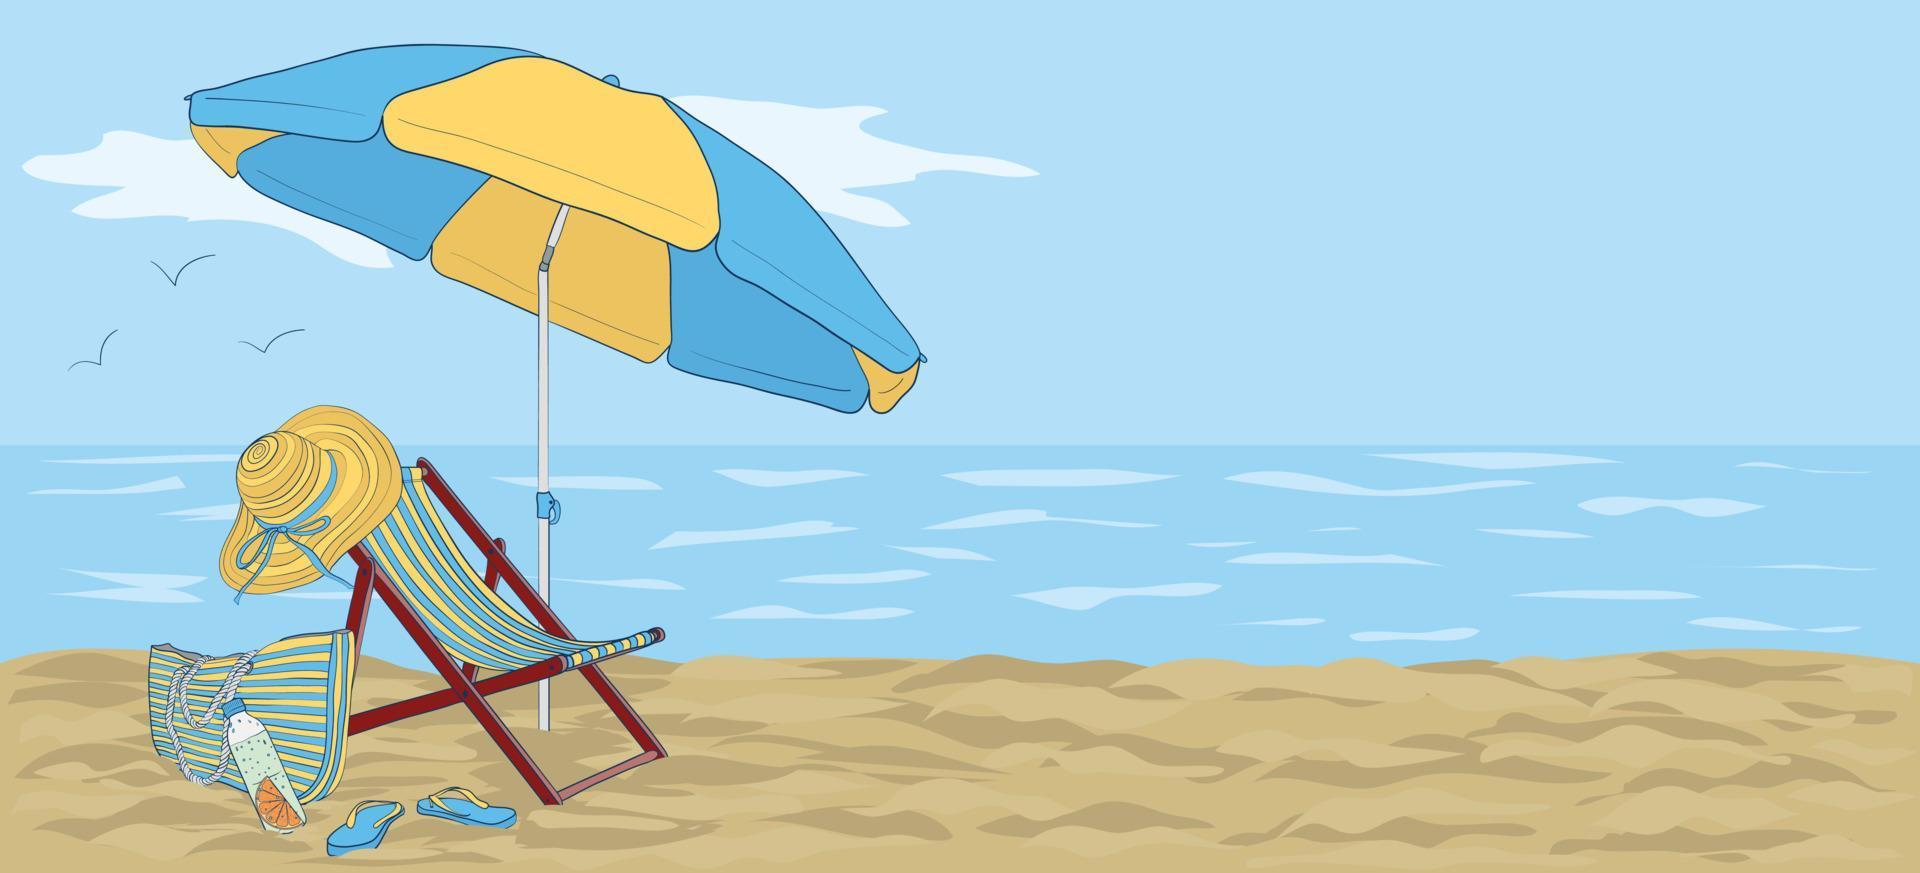 Longue on the beach under an umbrella against the background of the sea or ocean. Vacation illustration by the sea. vector